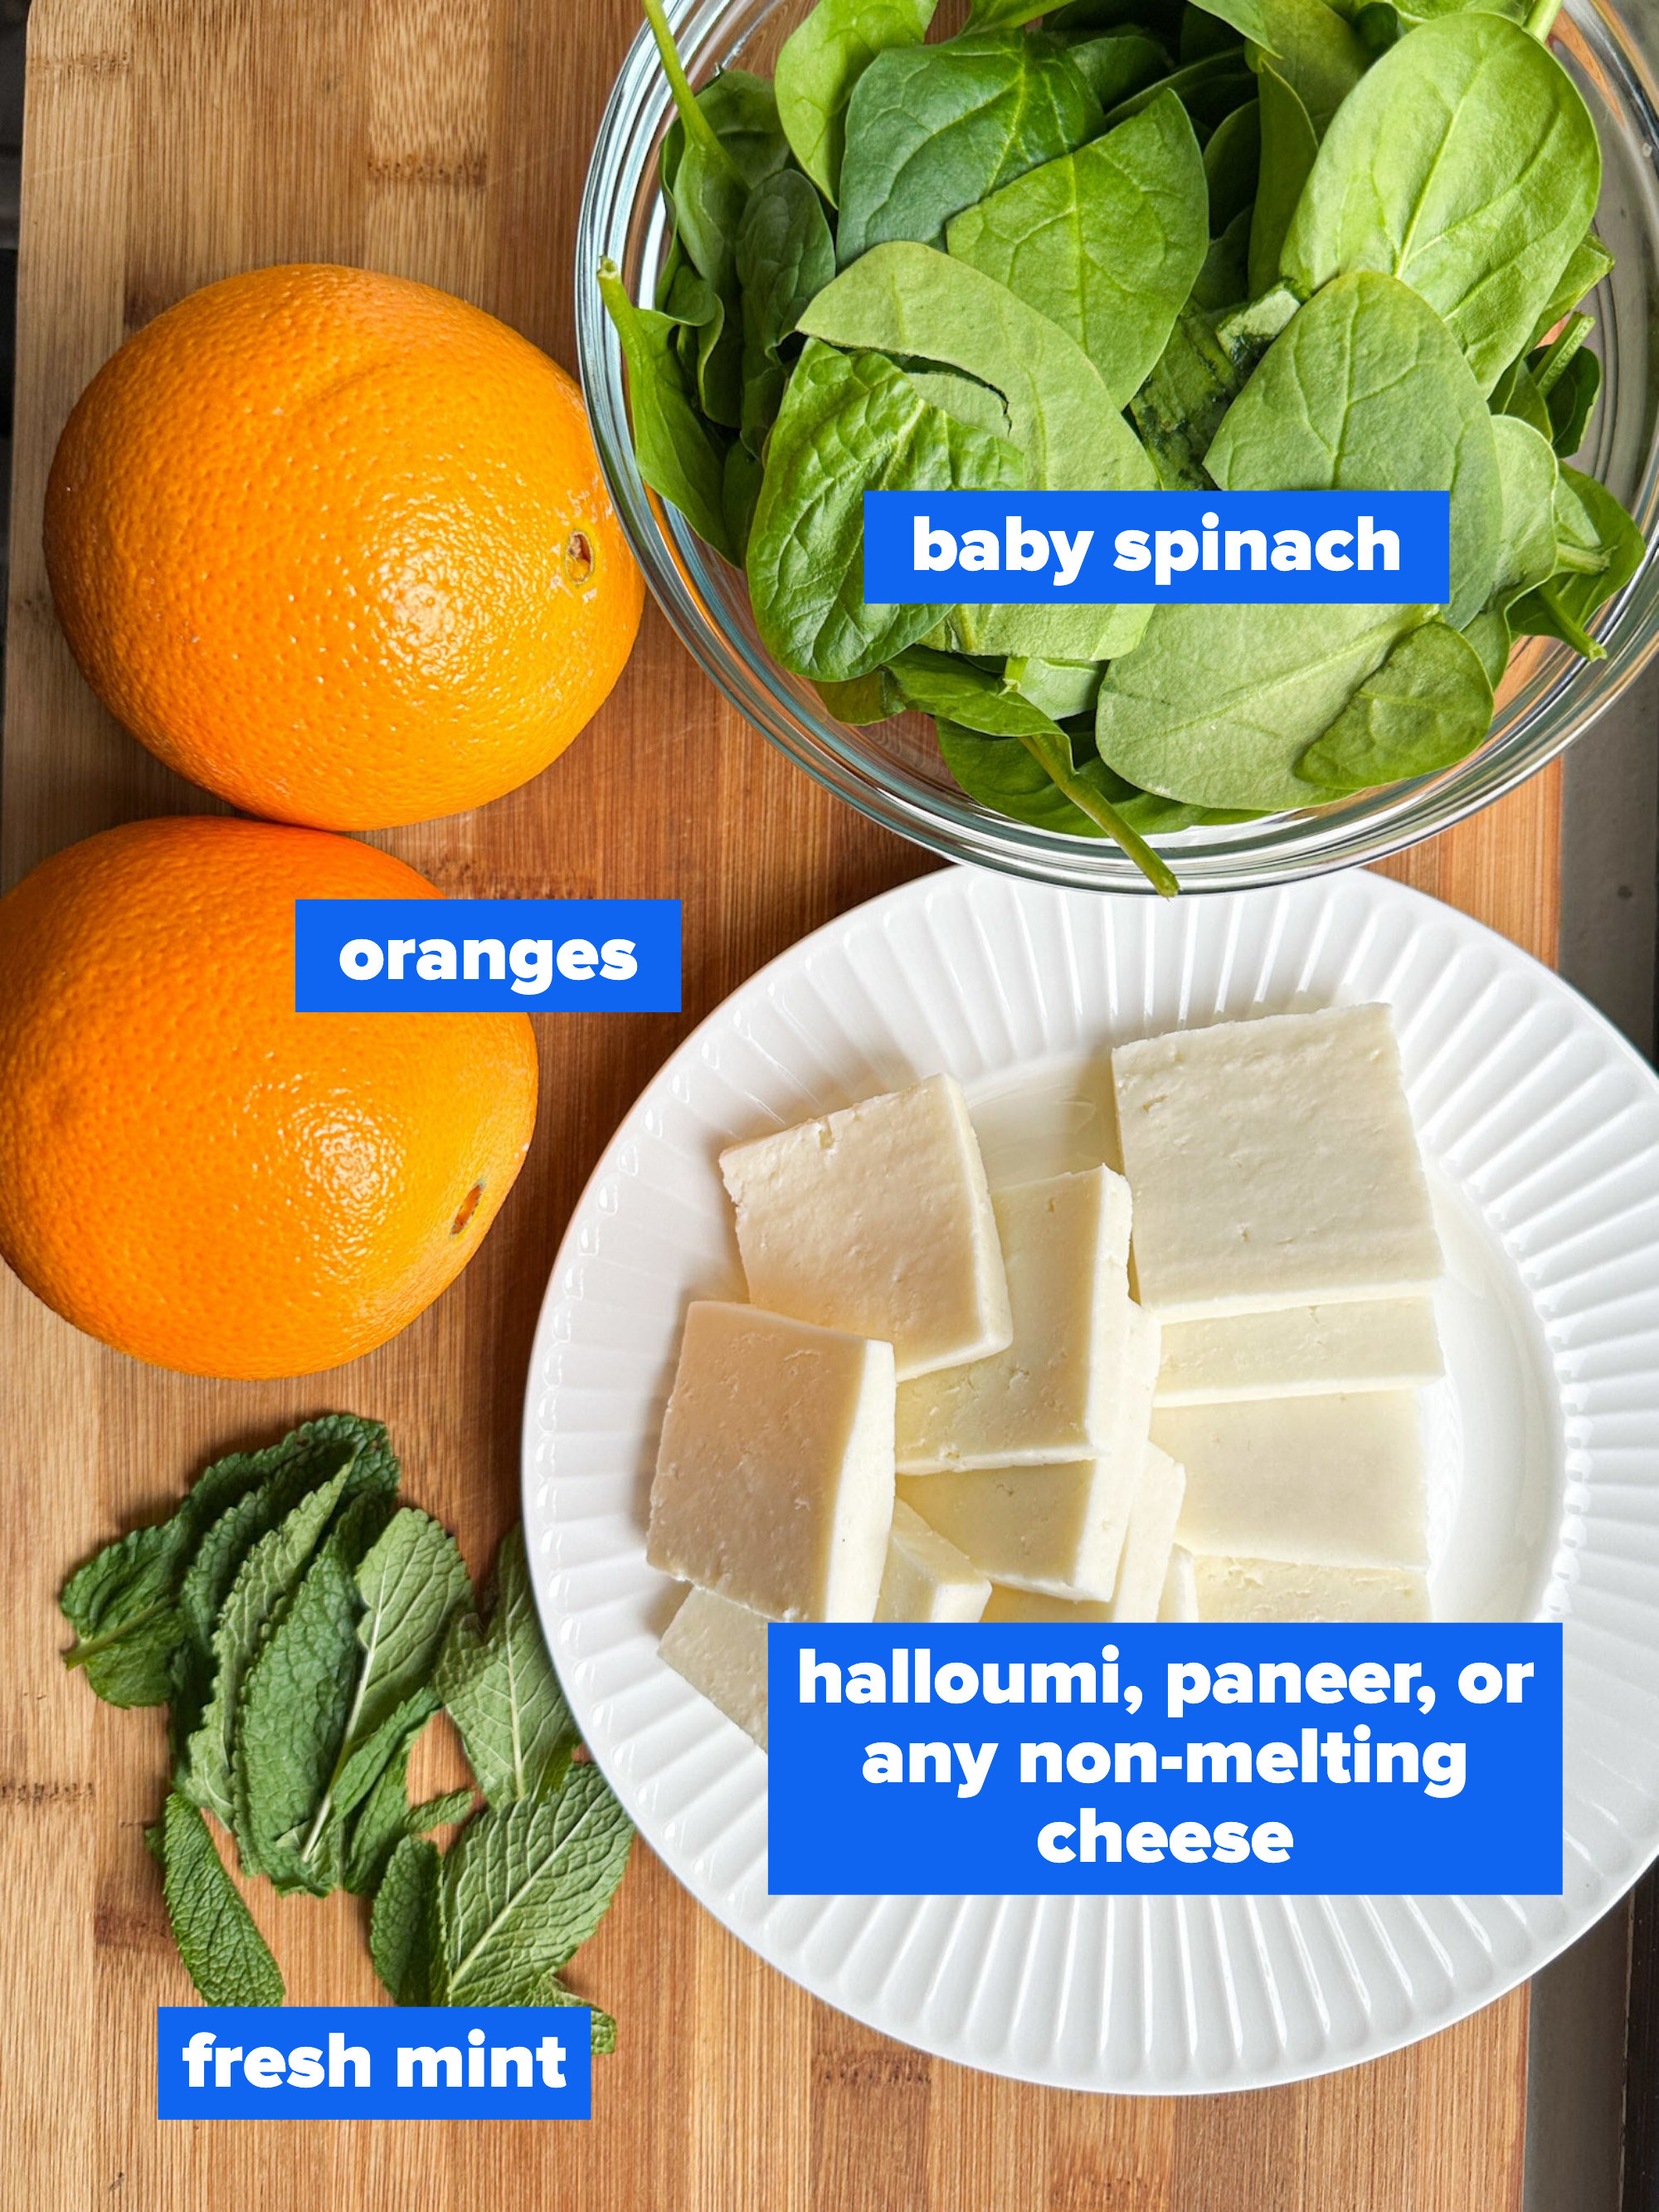 baby spinach, oranges, halloumi, paneer, or any non-melting cheese, and fresh mint